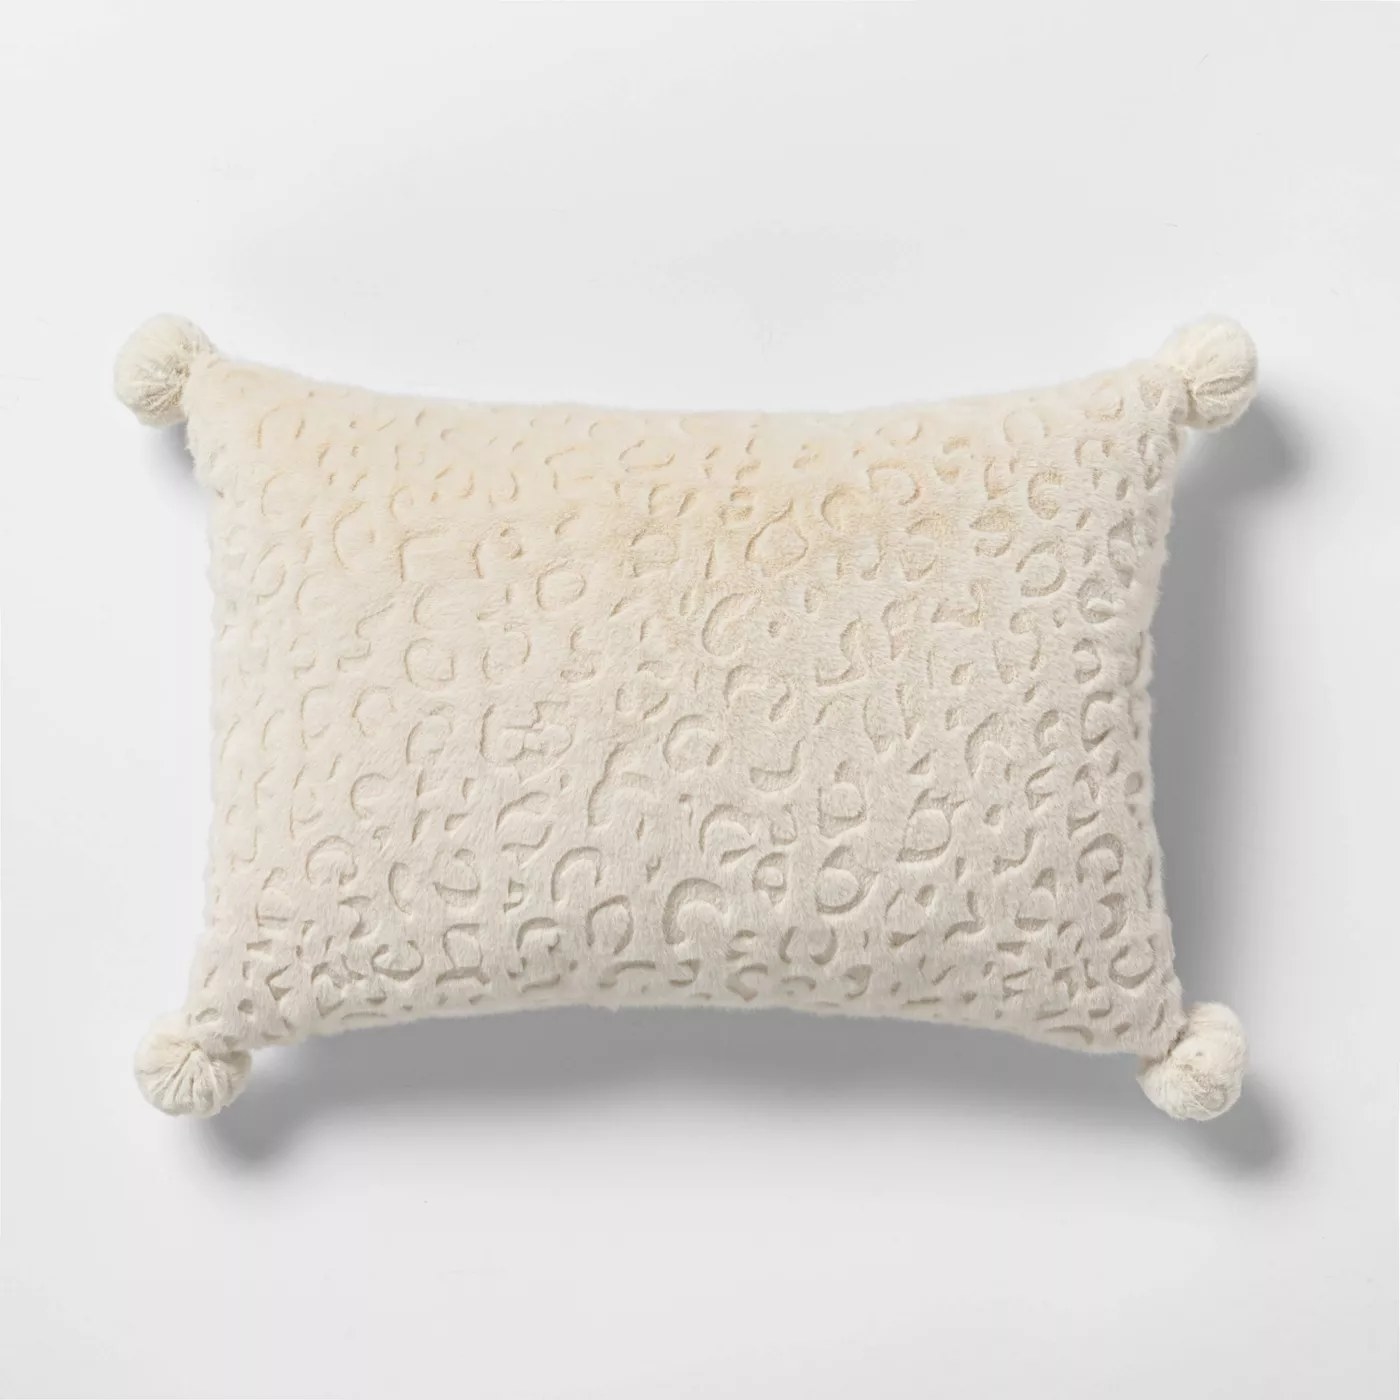 The ivory pillow with textured leopard spots and poms on every corner